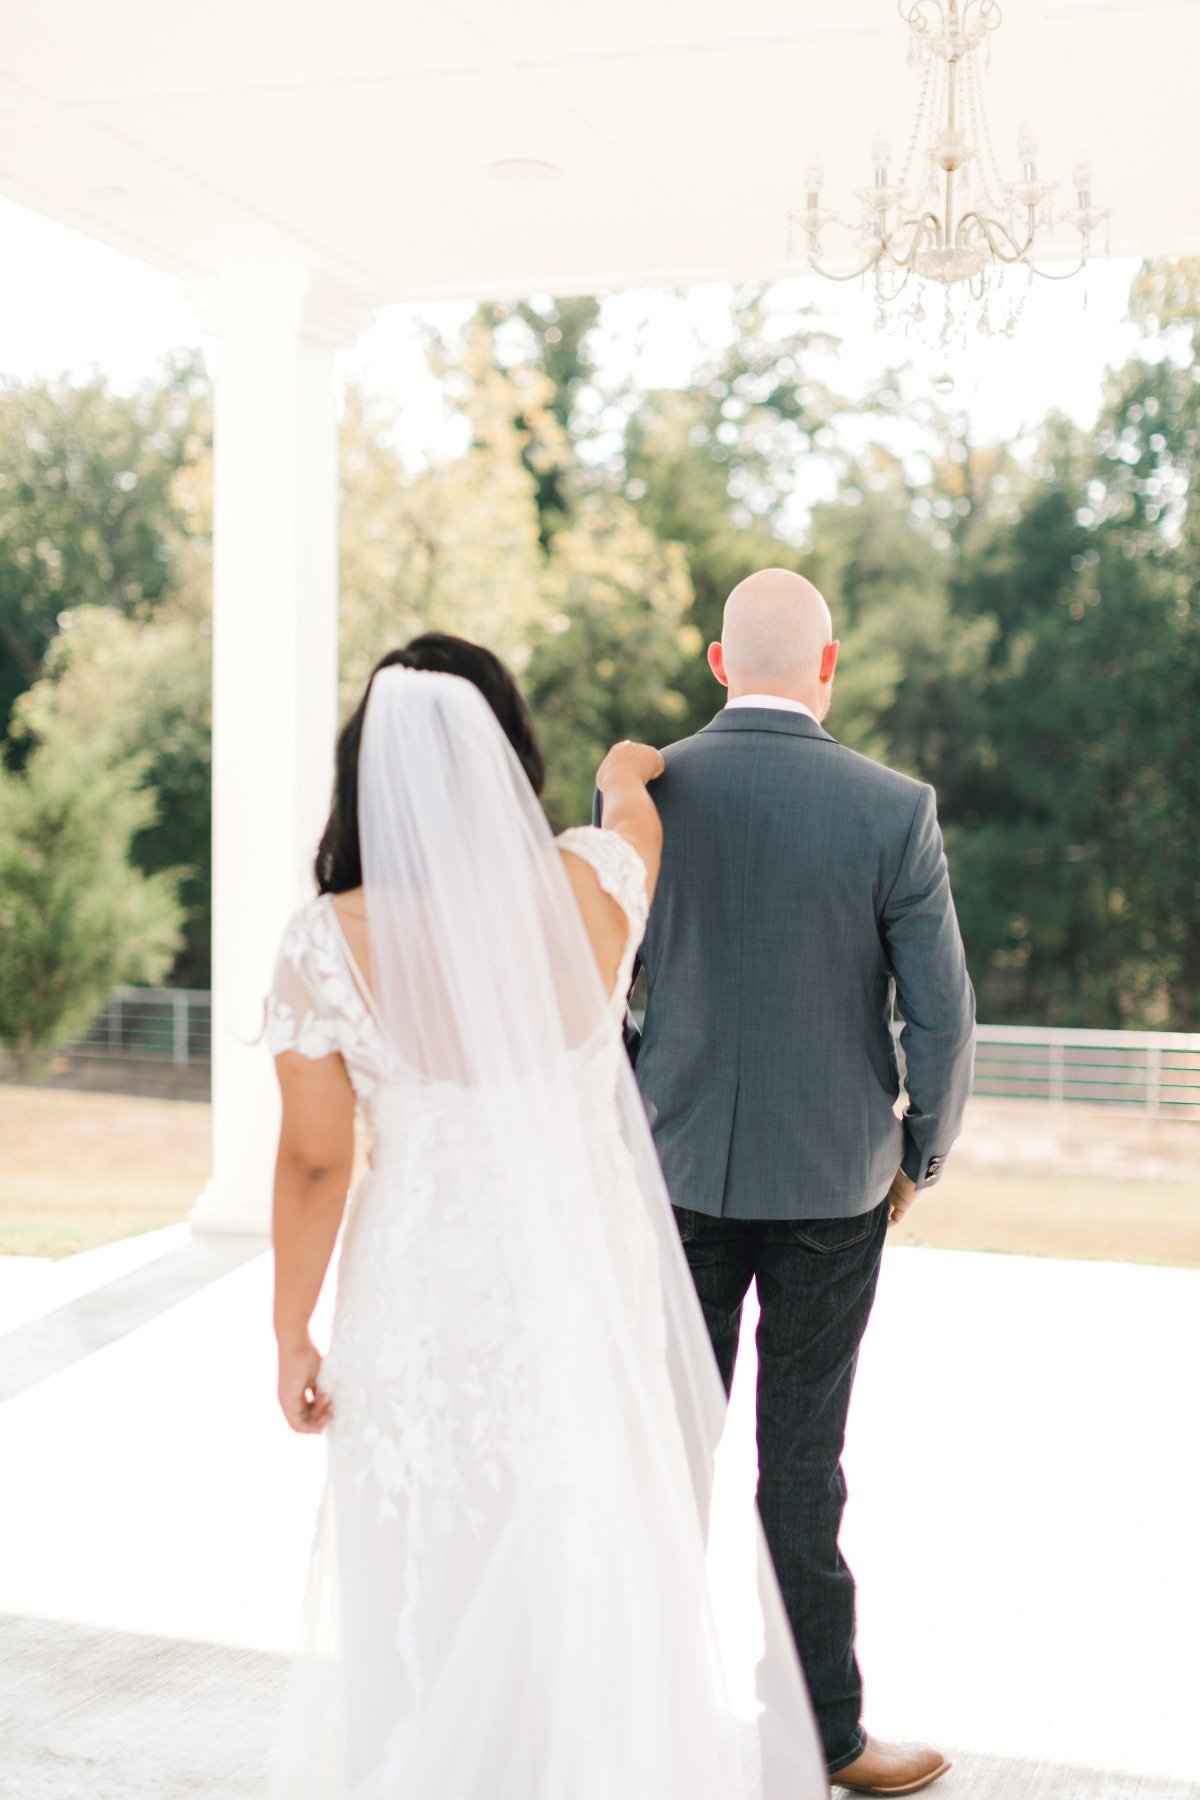 Romantic Countryside Destination Wedding at the Firefly Gardens